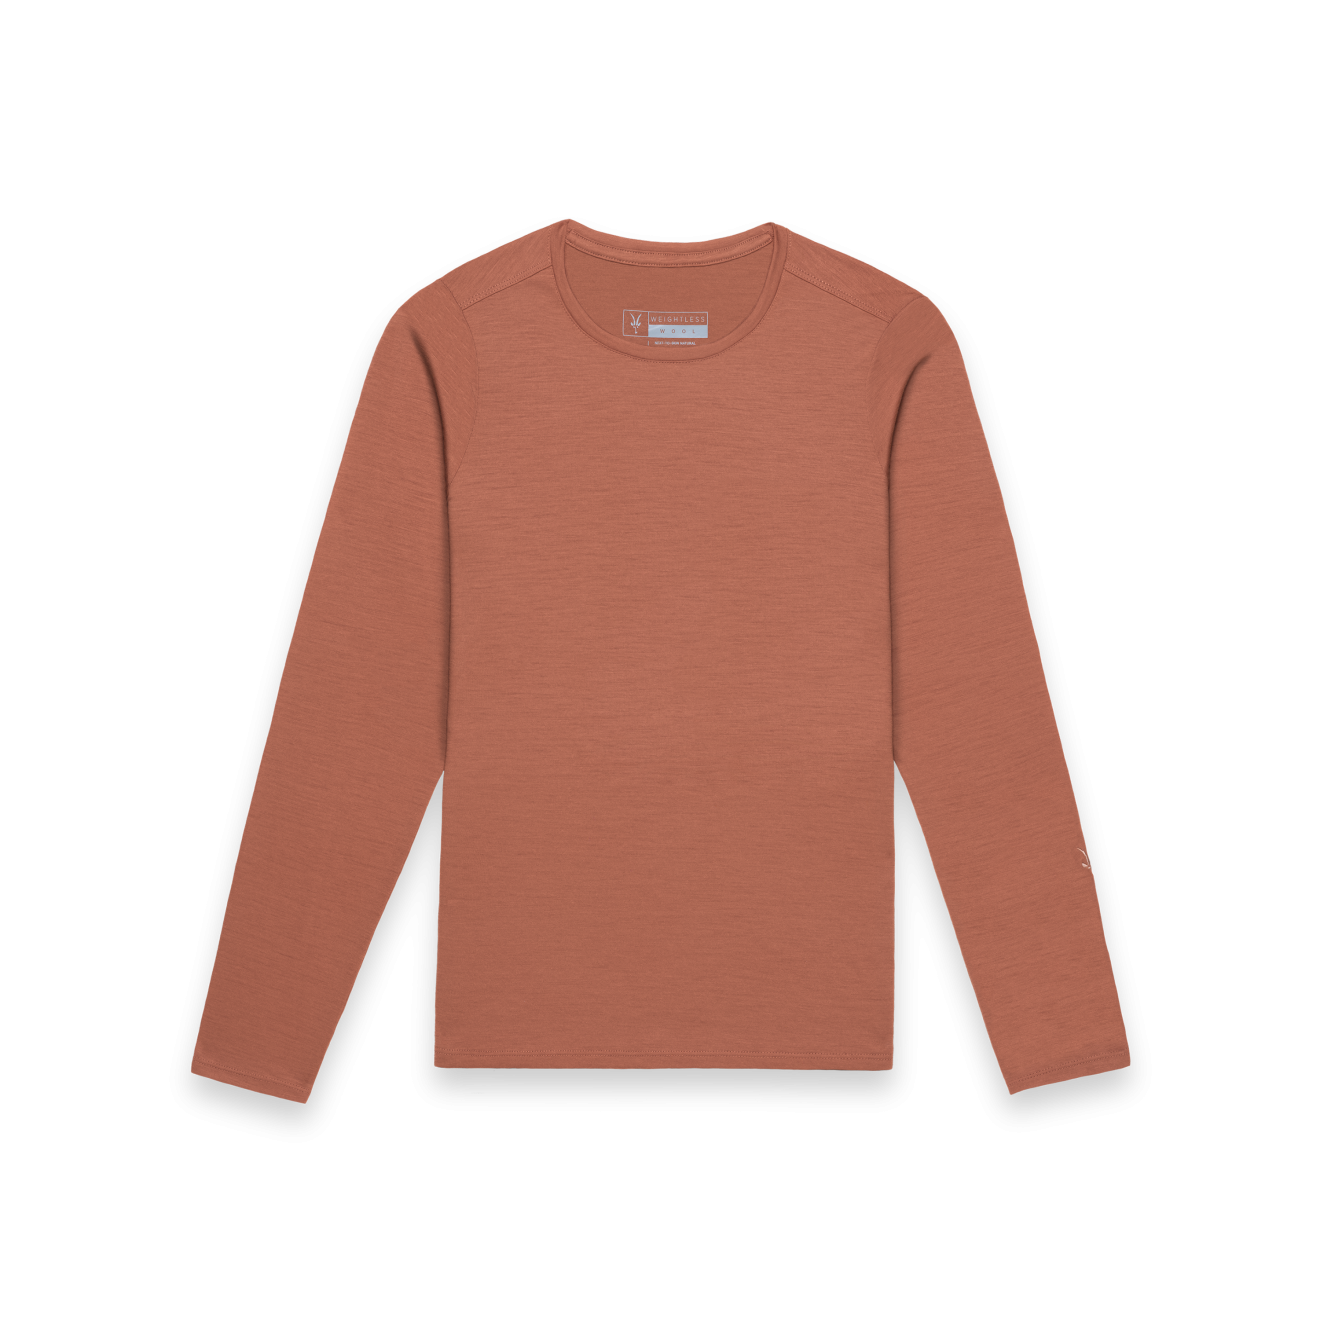 Long sleeve journey crew base layer from Ibex in terracotta